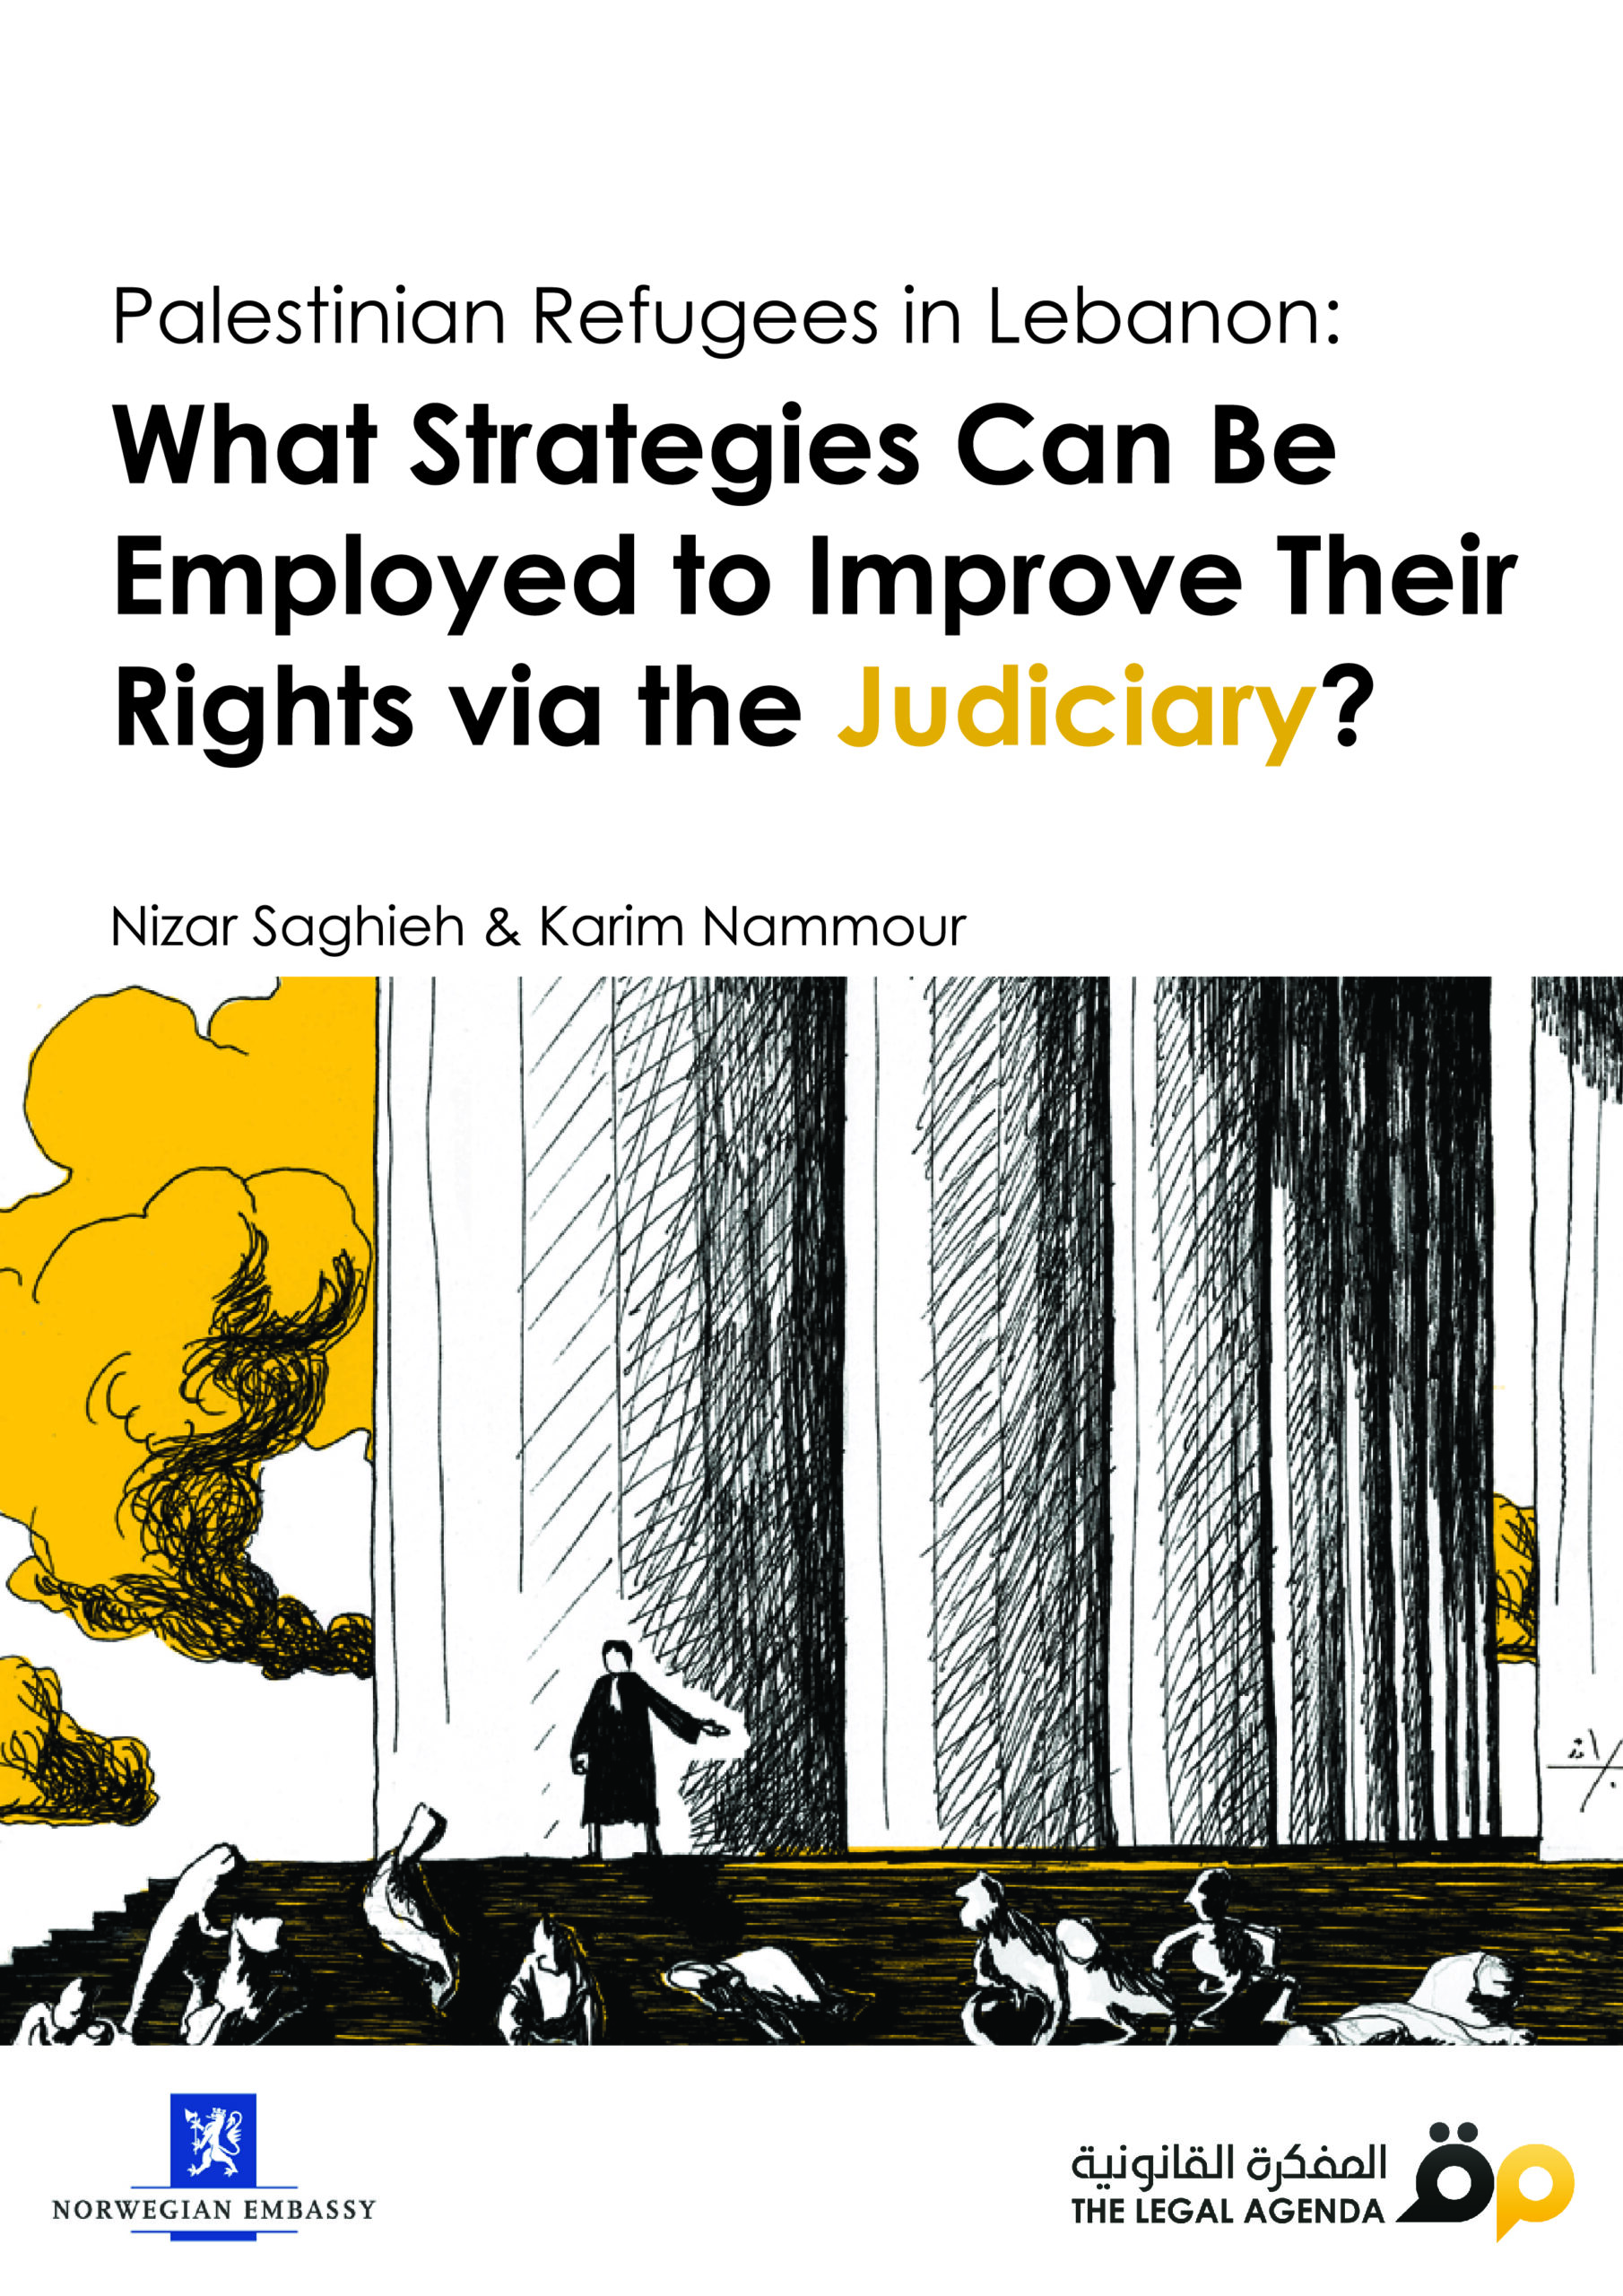 Palestinian Refugees in Lebanon: What Strategies Can Be Employed to Improve Their Rights via the Judiciary?